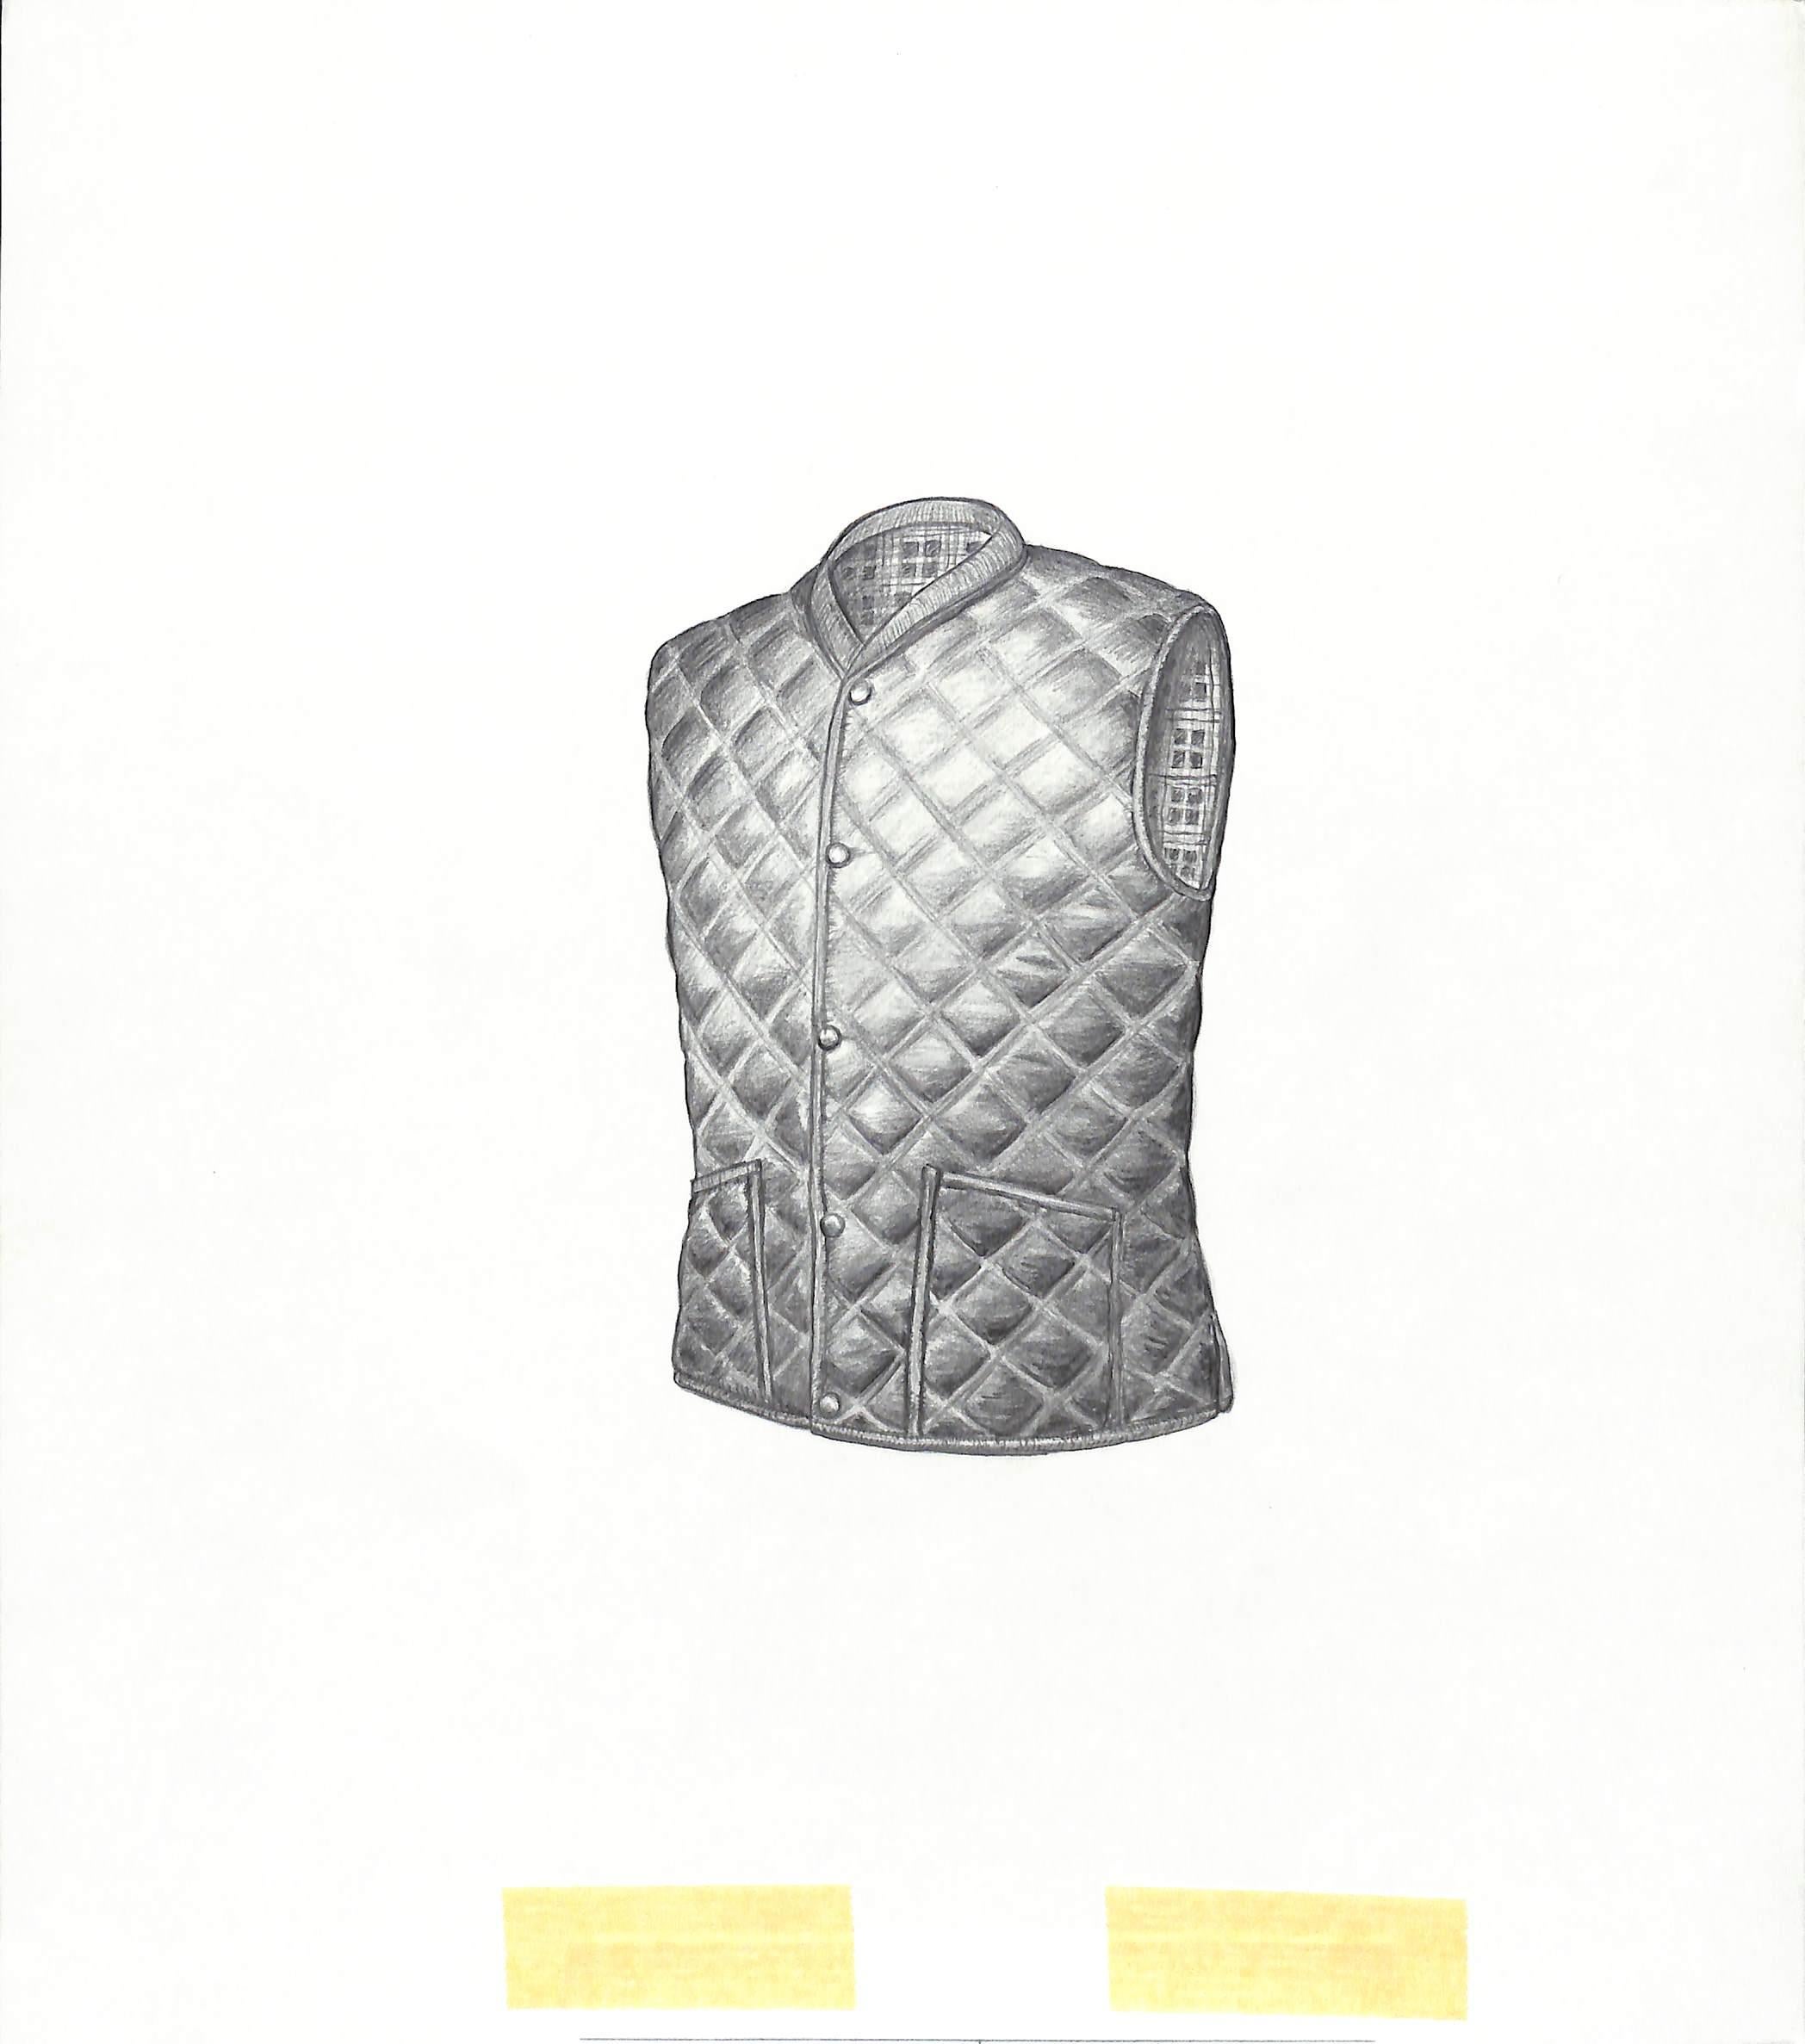 Quilted Vest Graphite Drawing - Art by Unknown